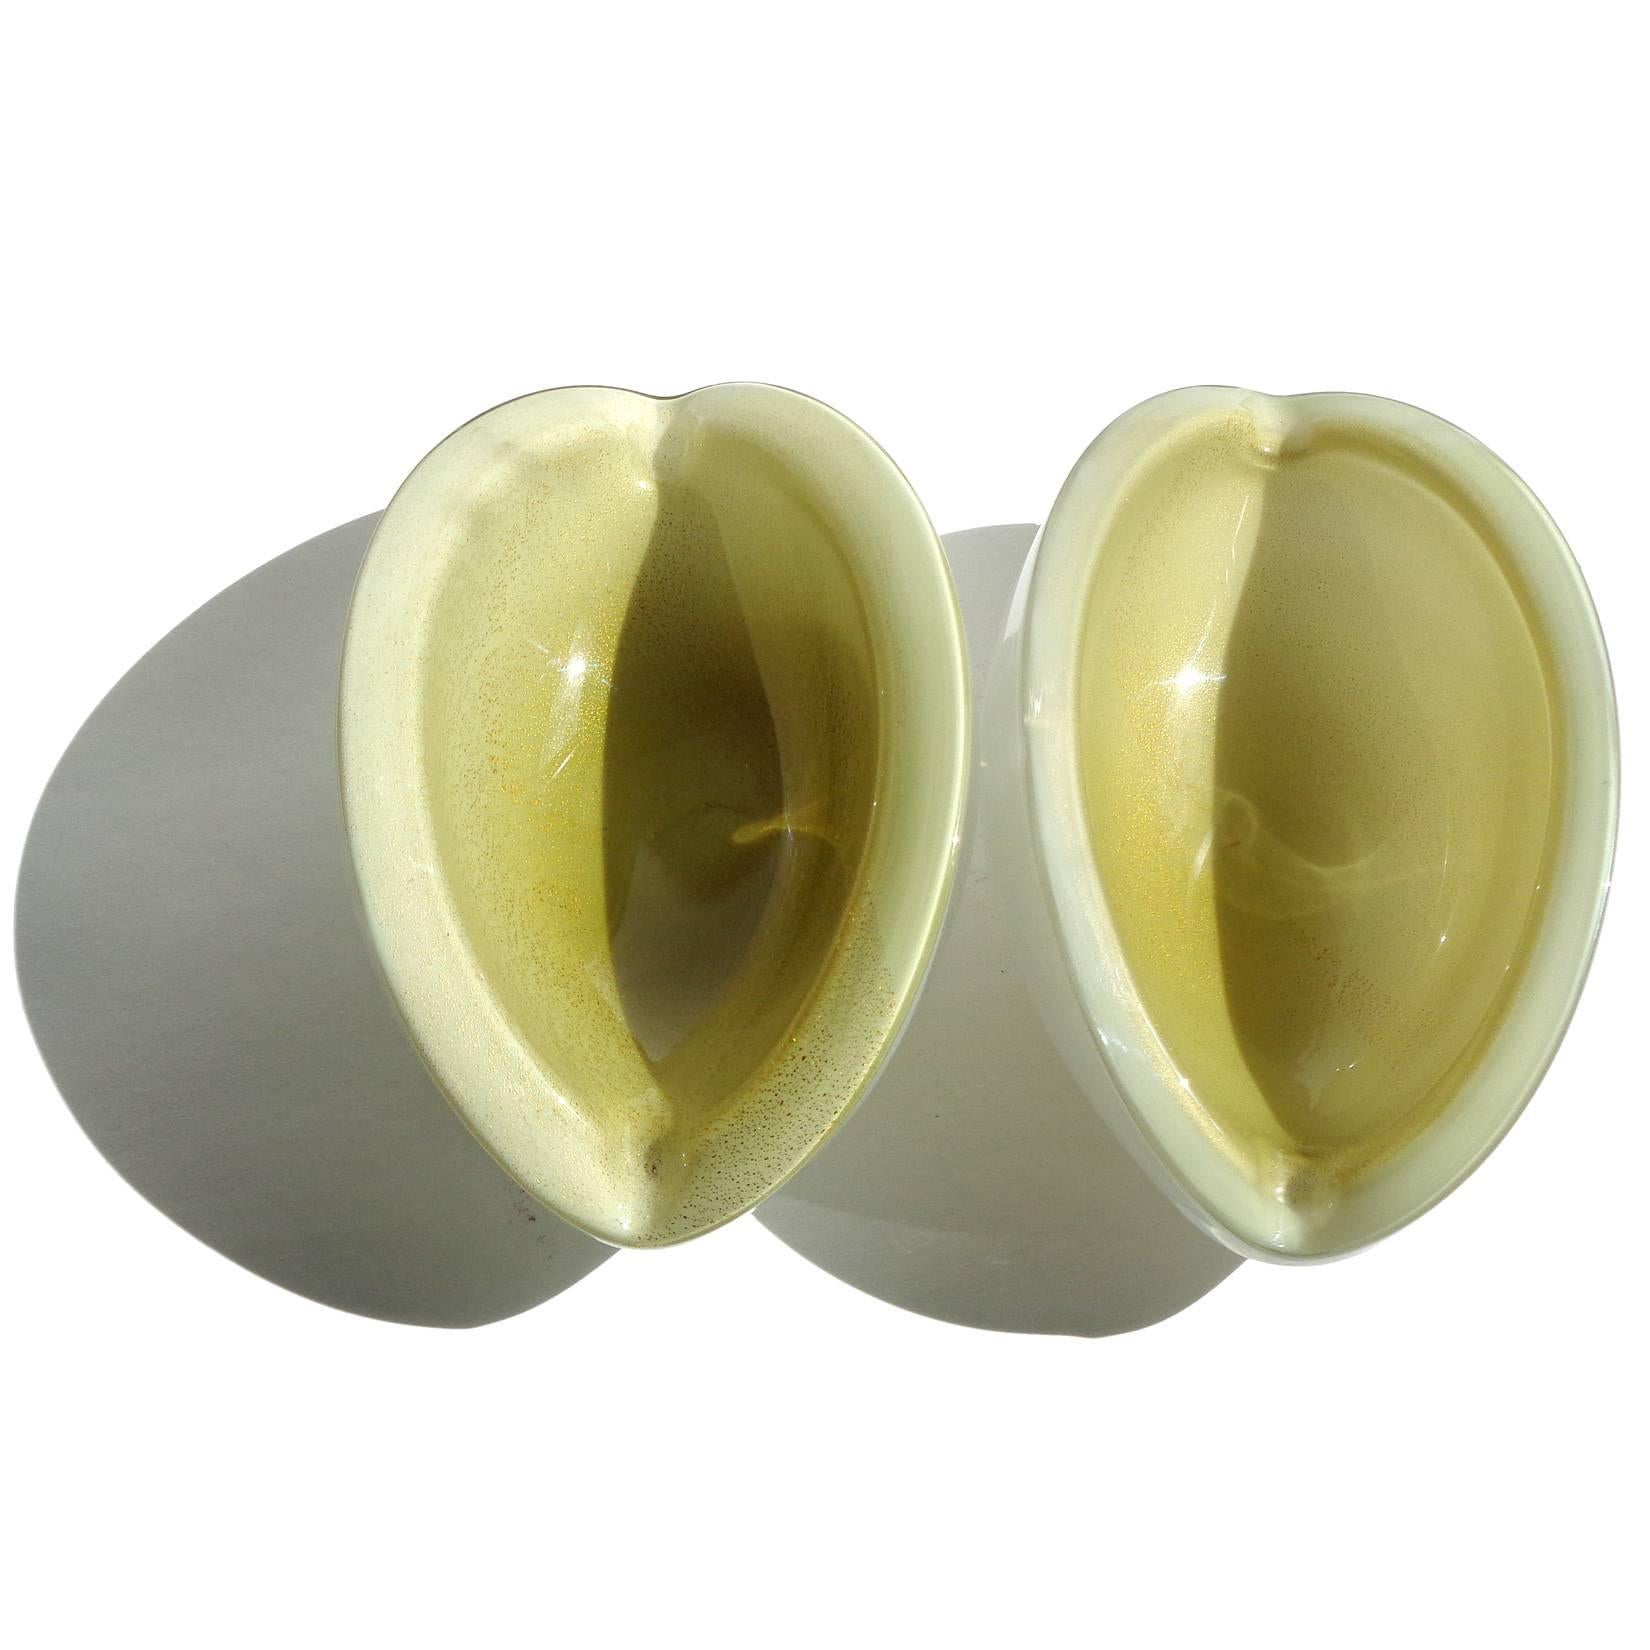 Priced per item - Beautiful Murano handblown white, olive green and gold leaf Italian art glass melon cut bowls. Documented to designer Alfredo Barbini. Cut at an angle on both sides, with small indents at each end. Great decorative piece for any